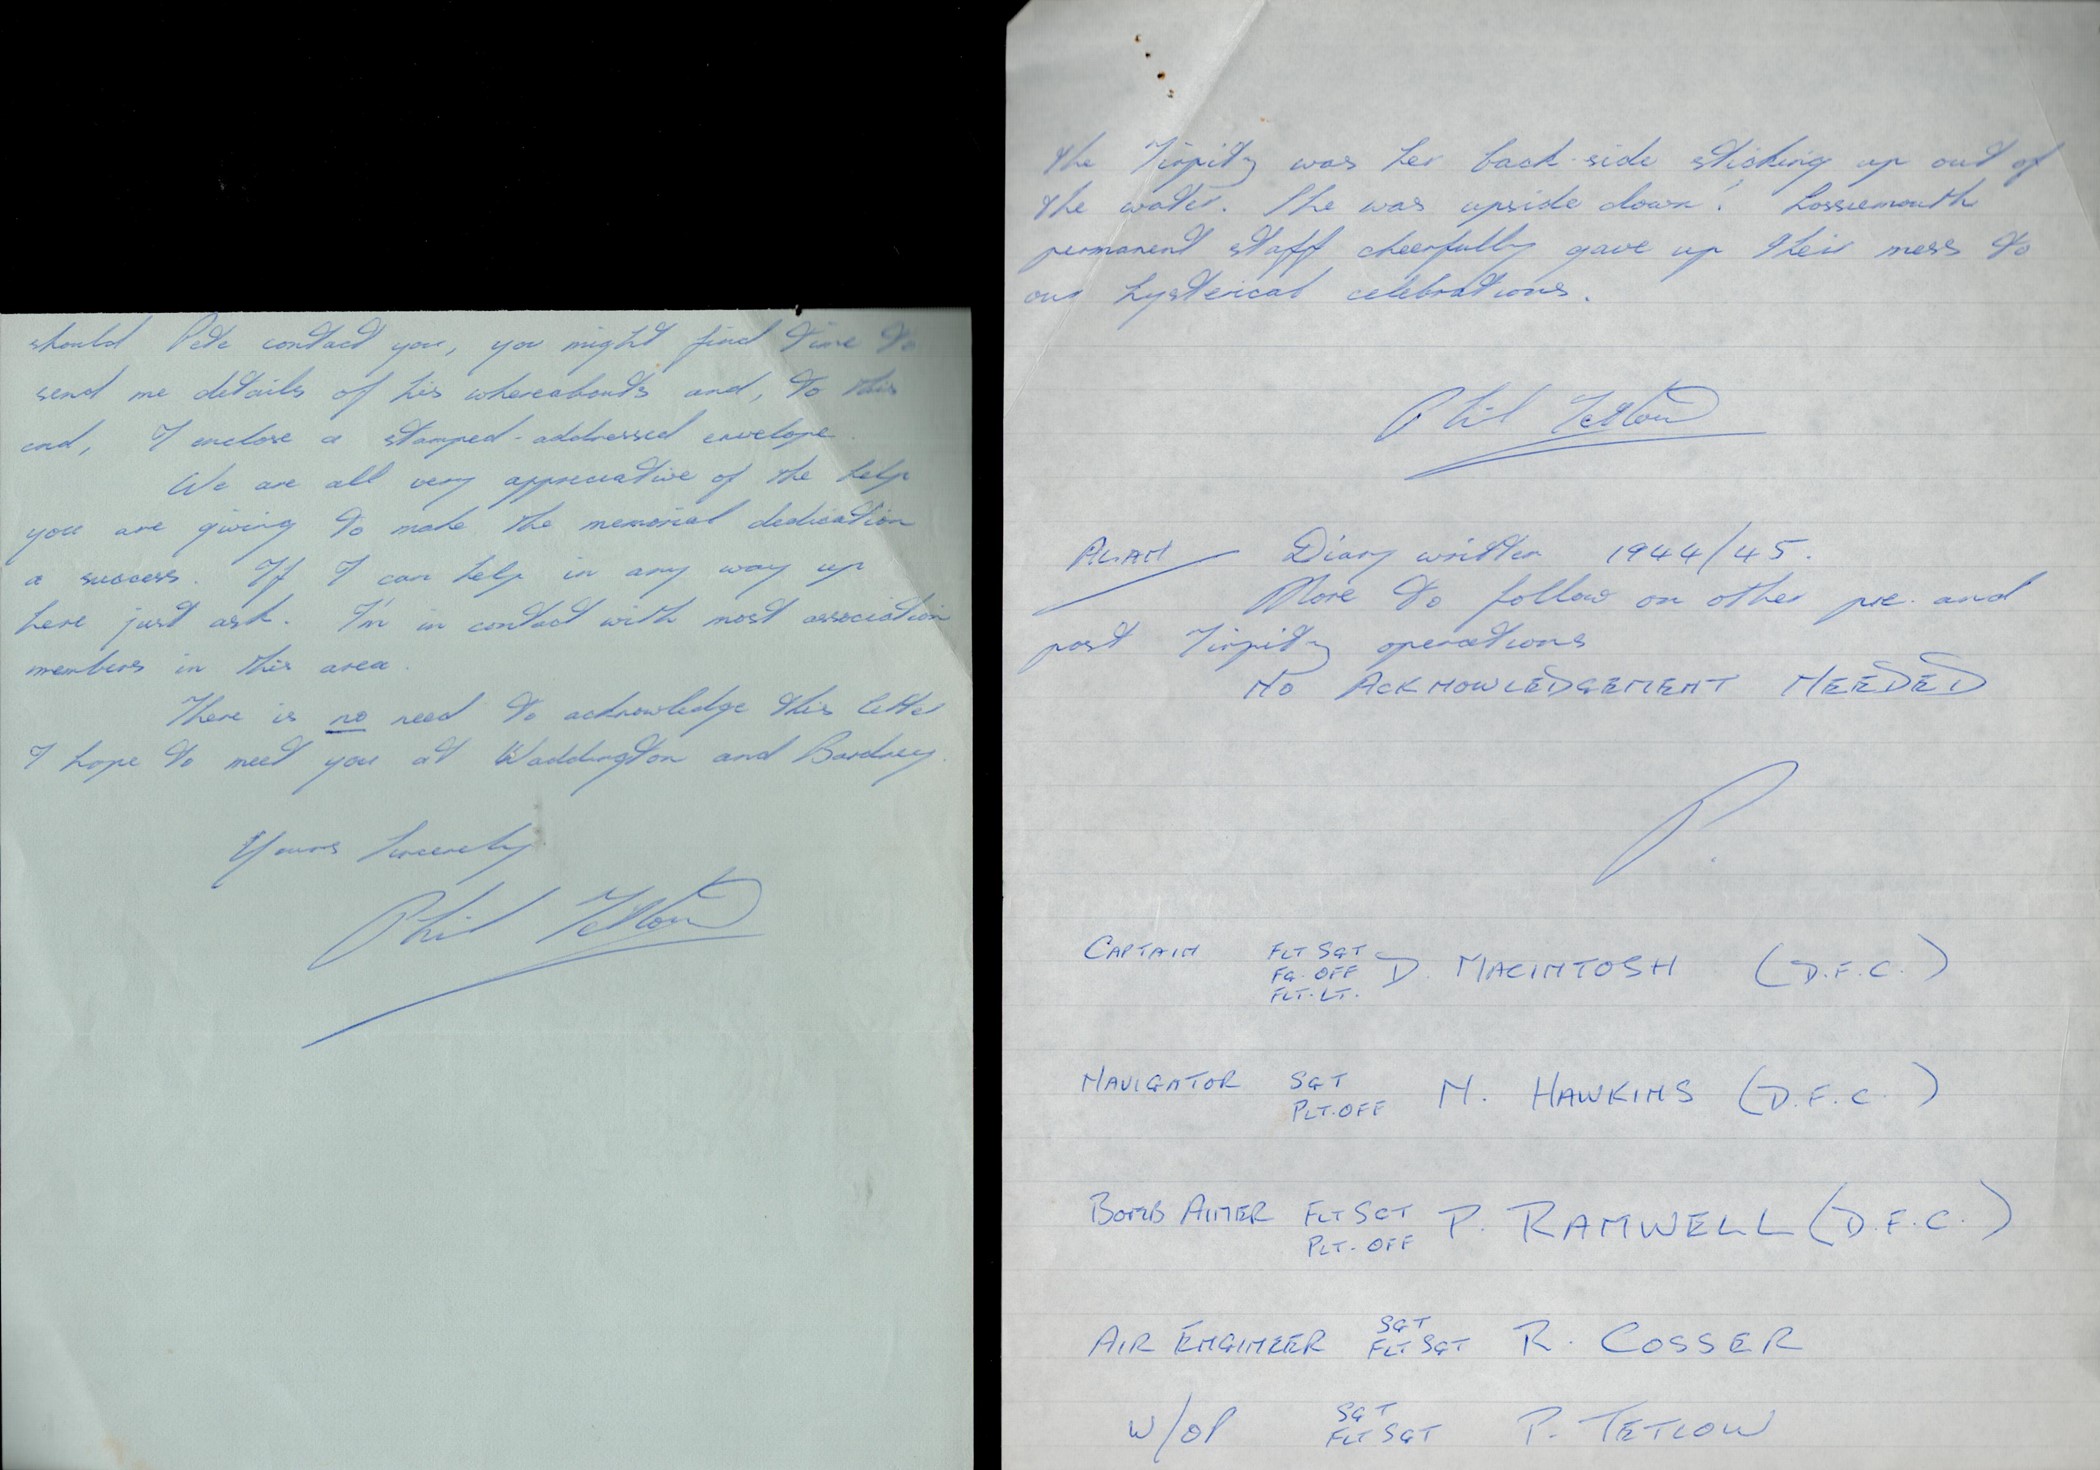 Tirpitz Raid veteran Philip Tetlow multiple page ALS dated 11 February 1980 in which he writes about